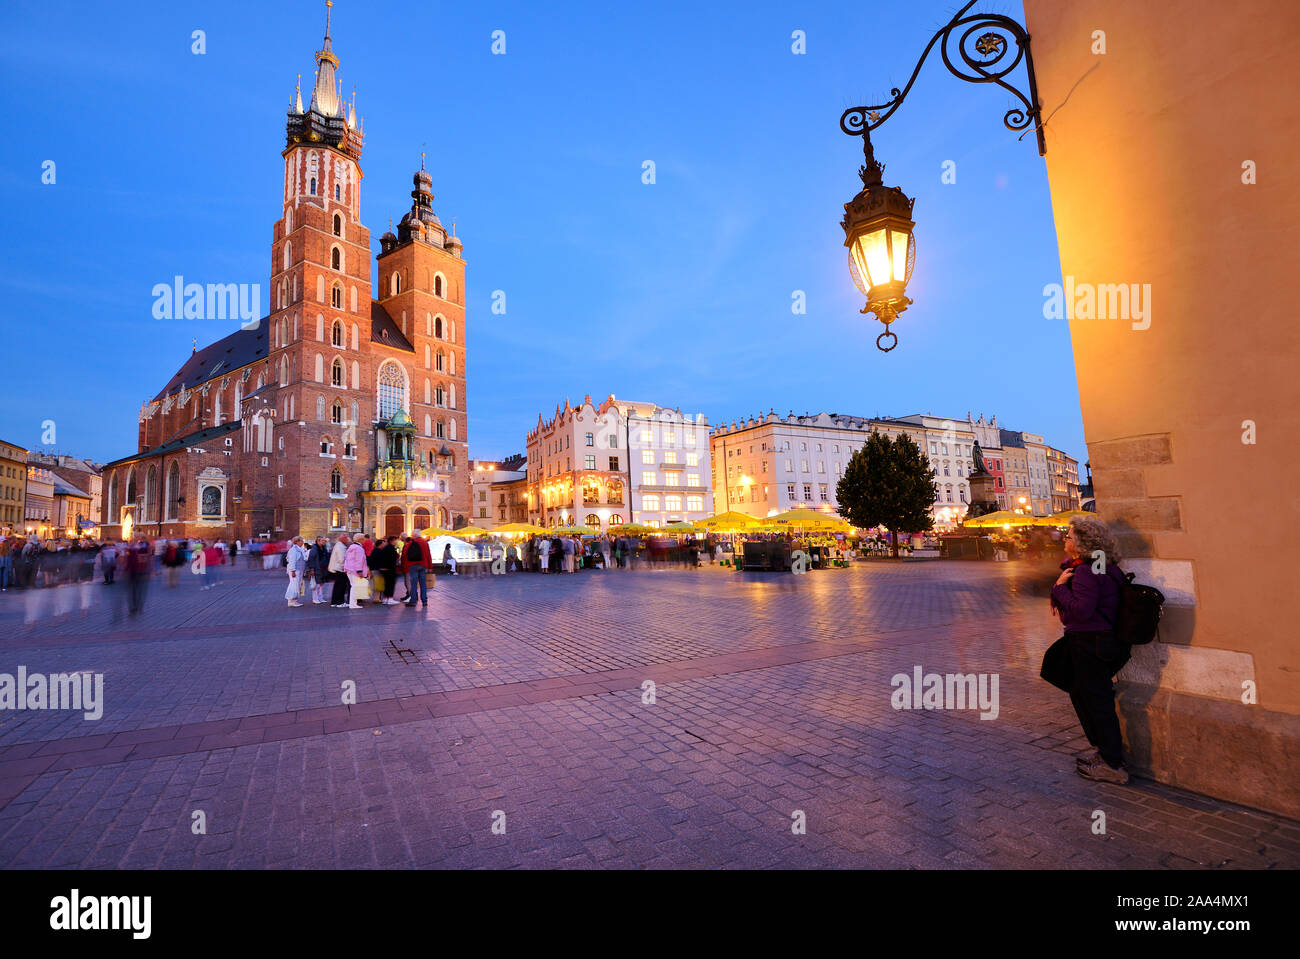 St. Mary's Basilica at the Central Market Square (Rynek) of the Old Town of Krakow. It is a Unesco World Heritage Site. Krakow, Poland Stock Photo